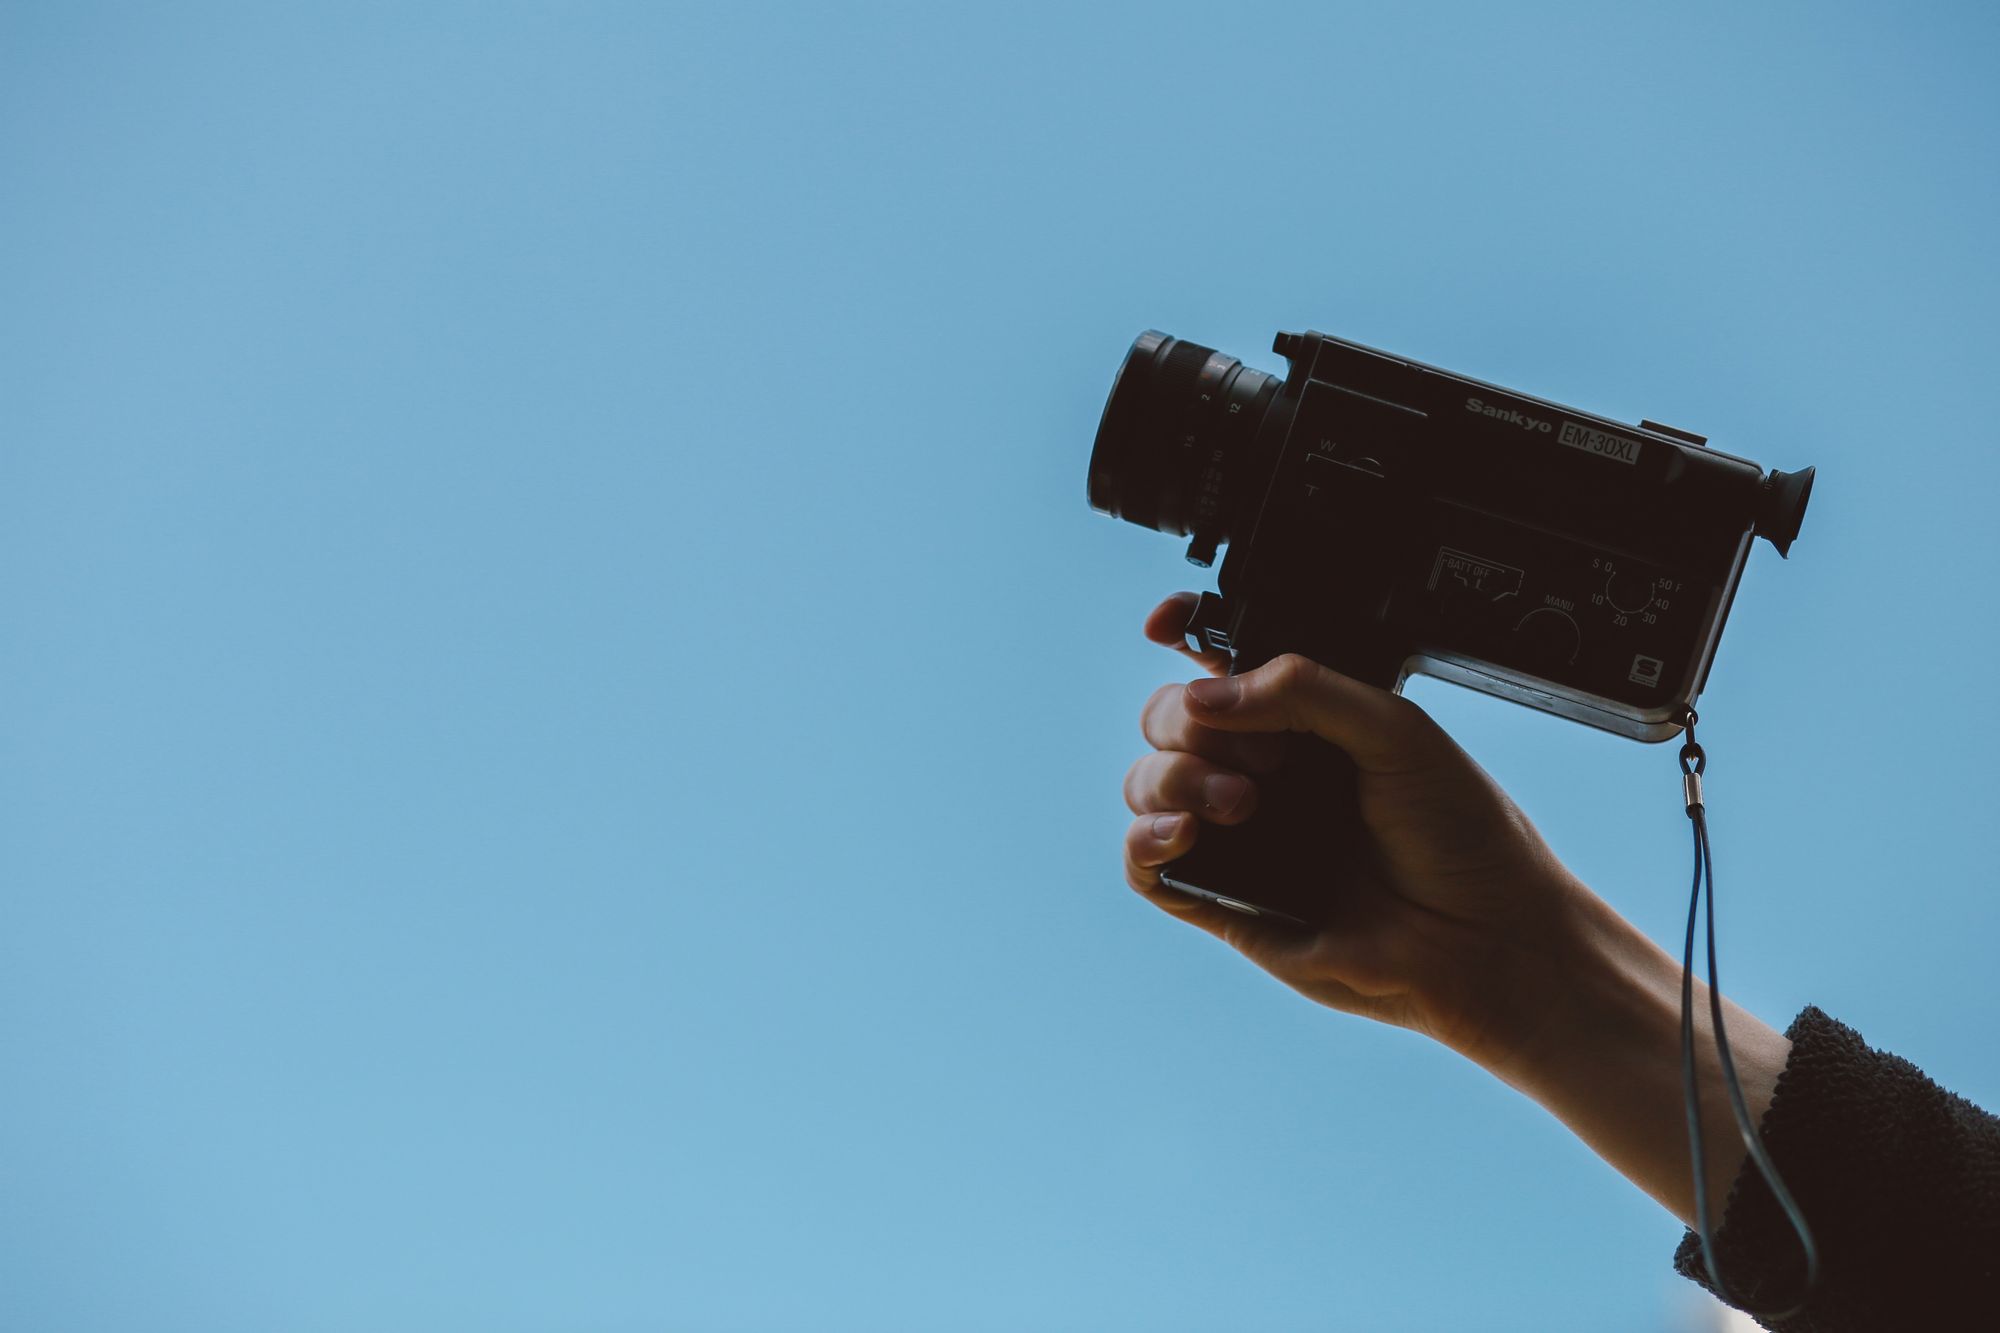 Stock image of a hand holding an old film camera with a blue background